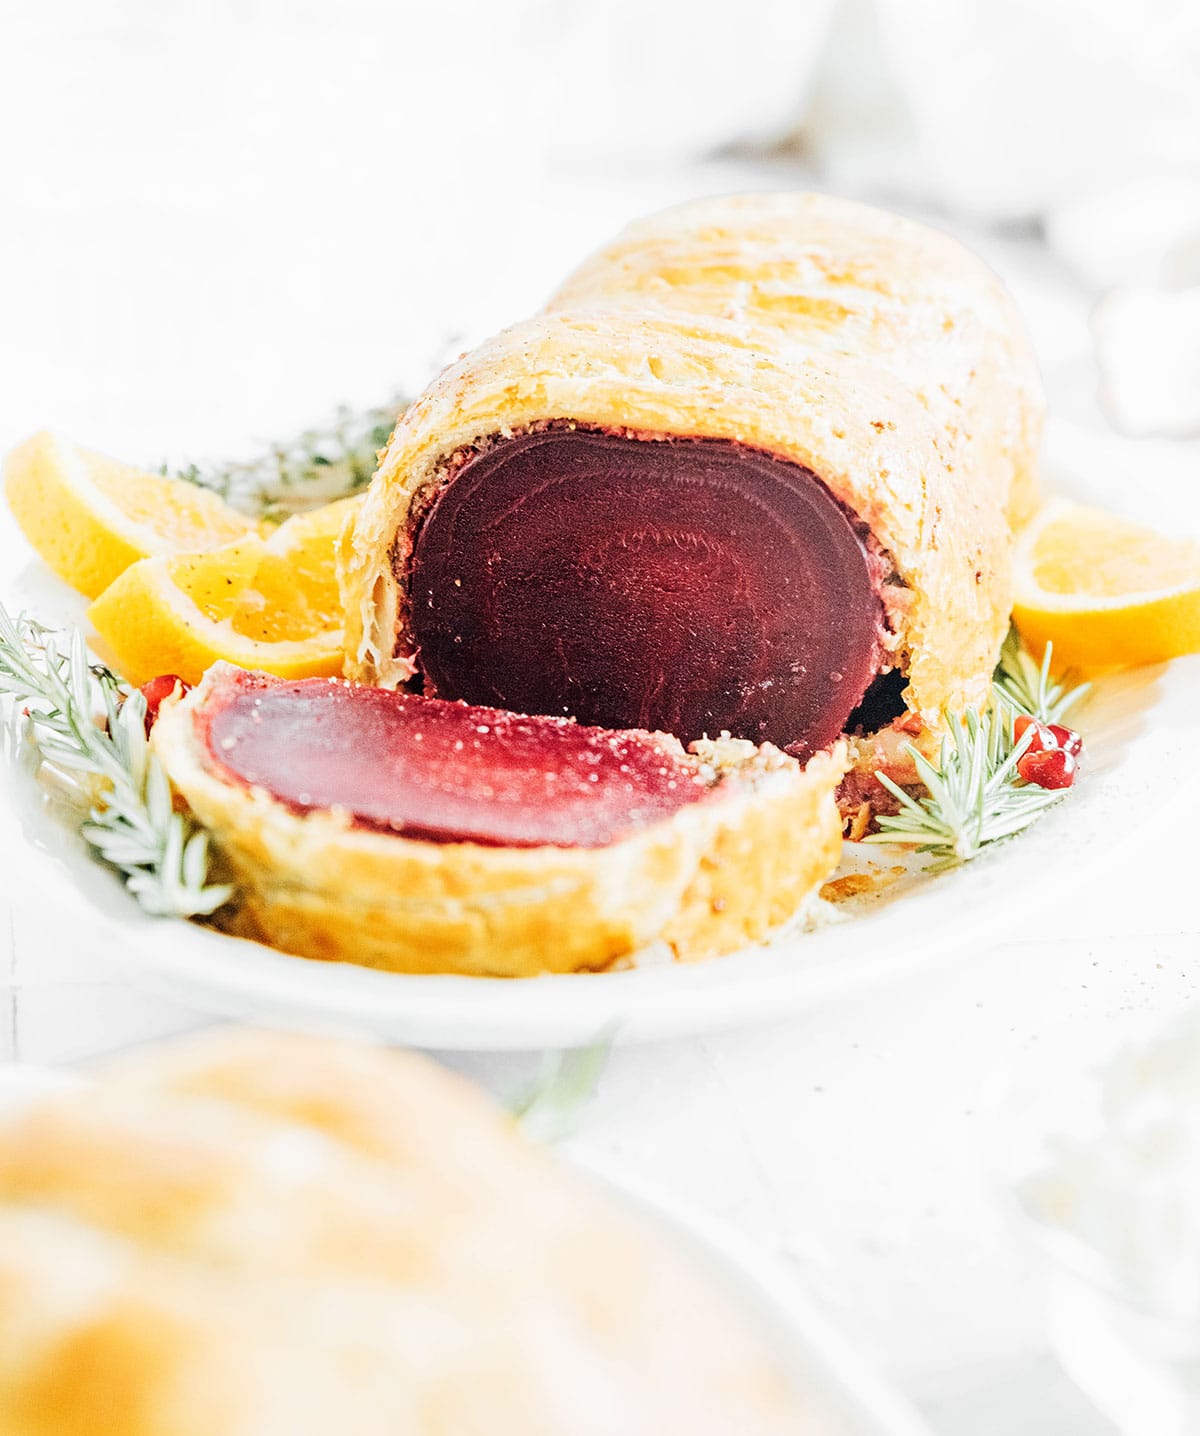 Beet Wellington on a serving platter with sprigs of rosemary and sliced oranges.